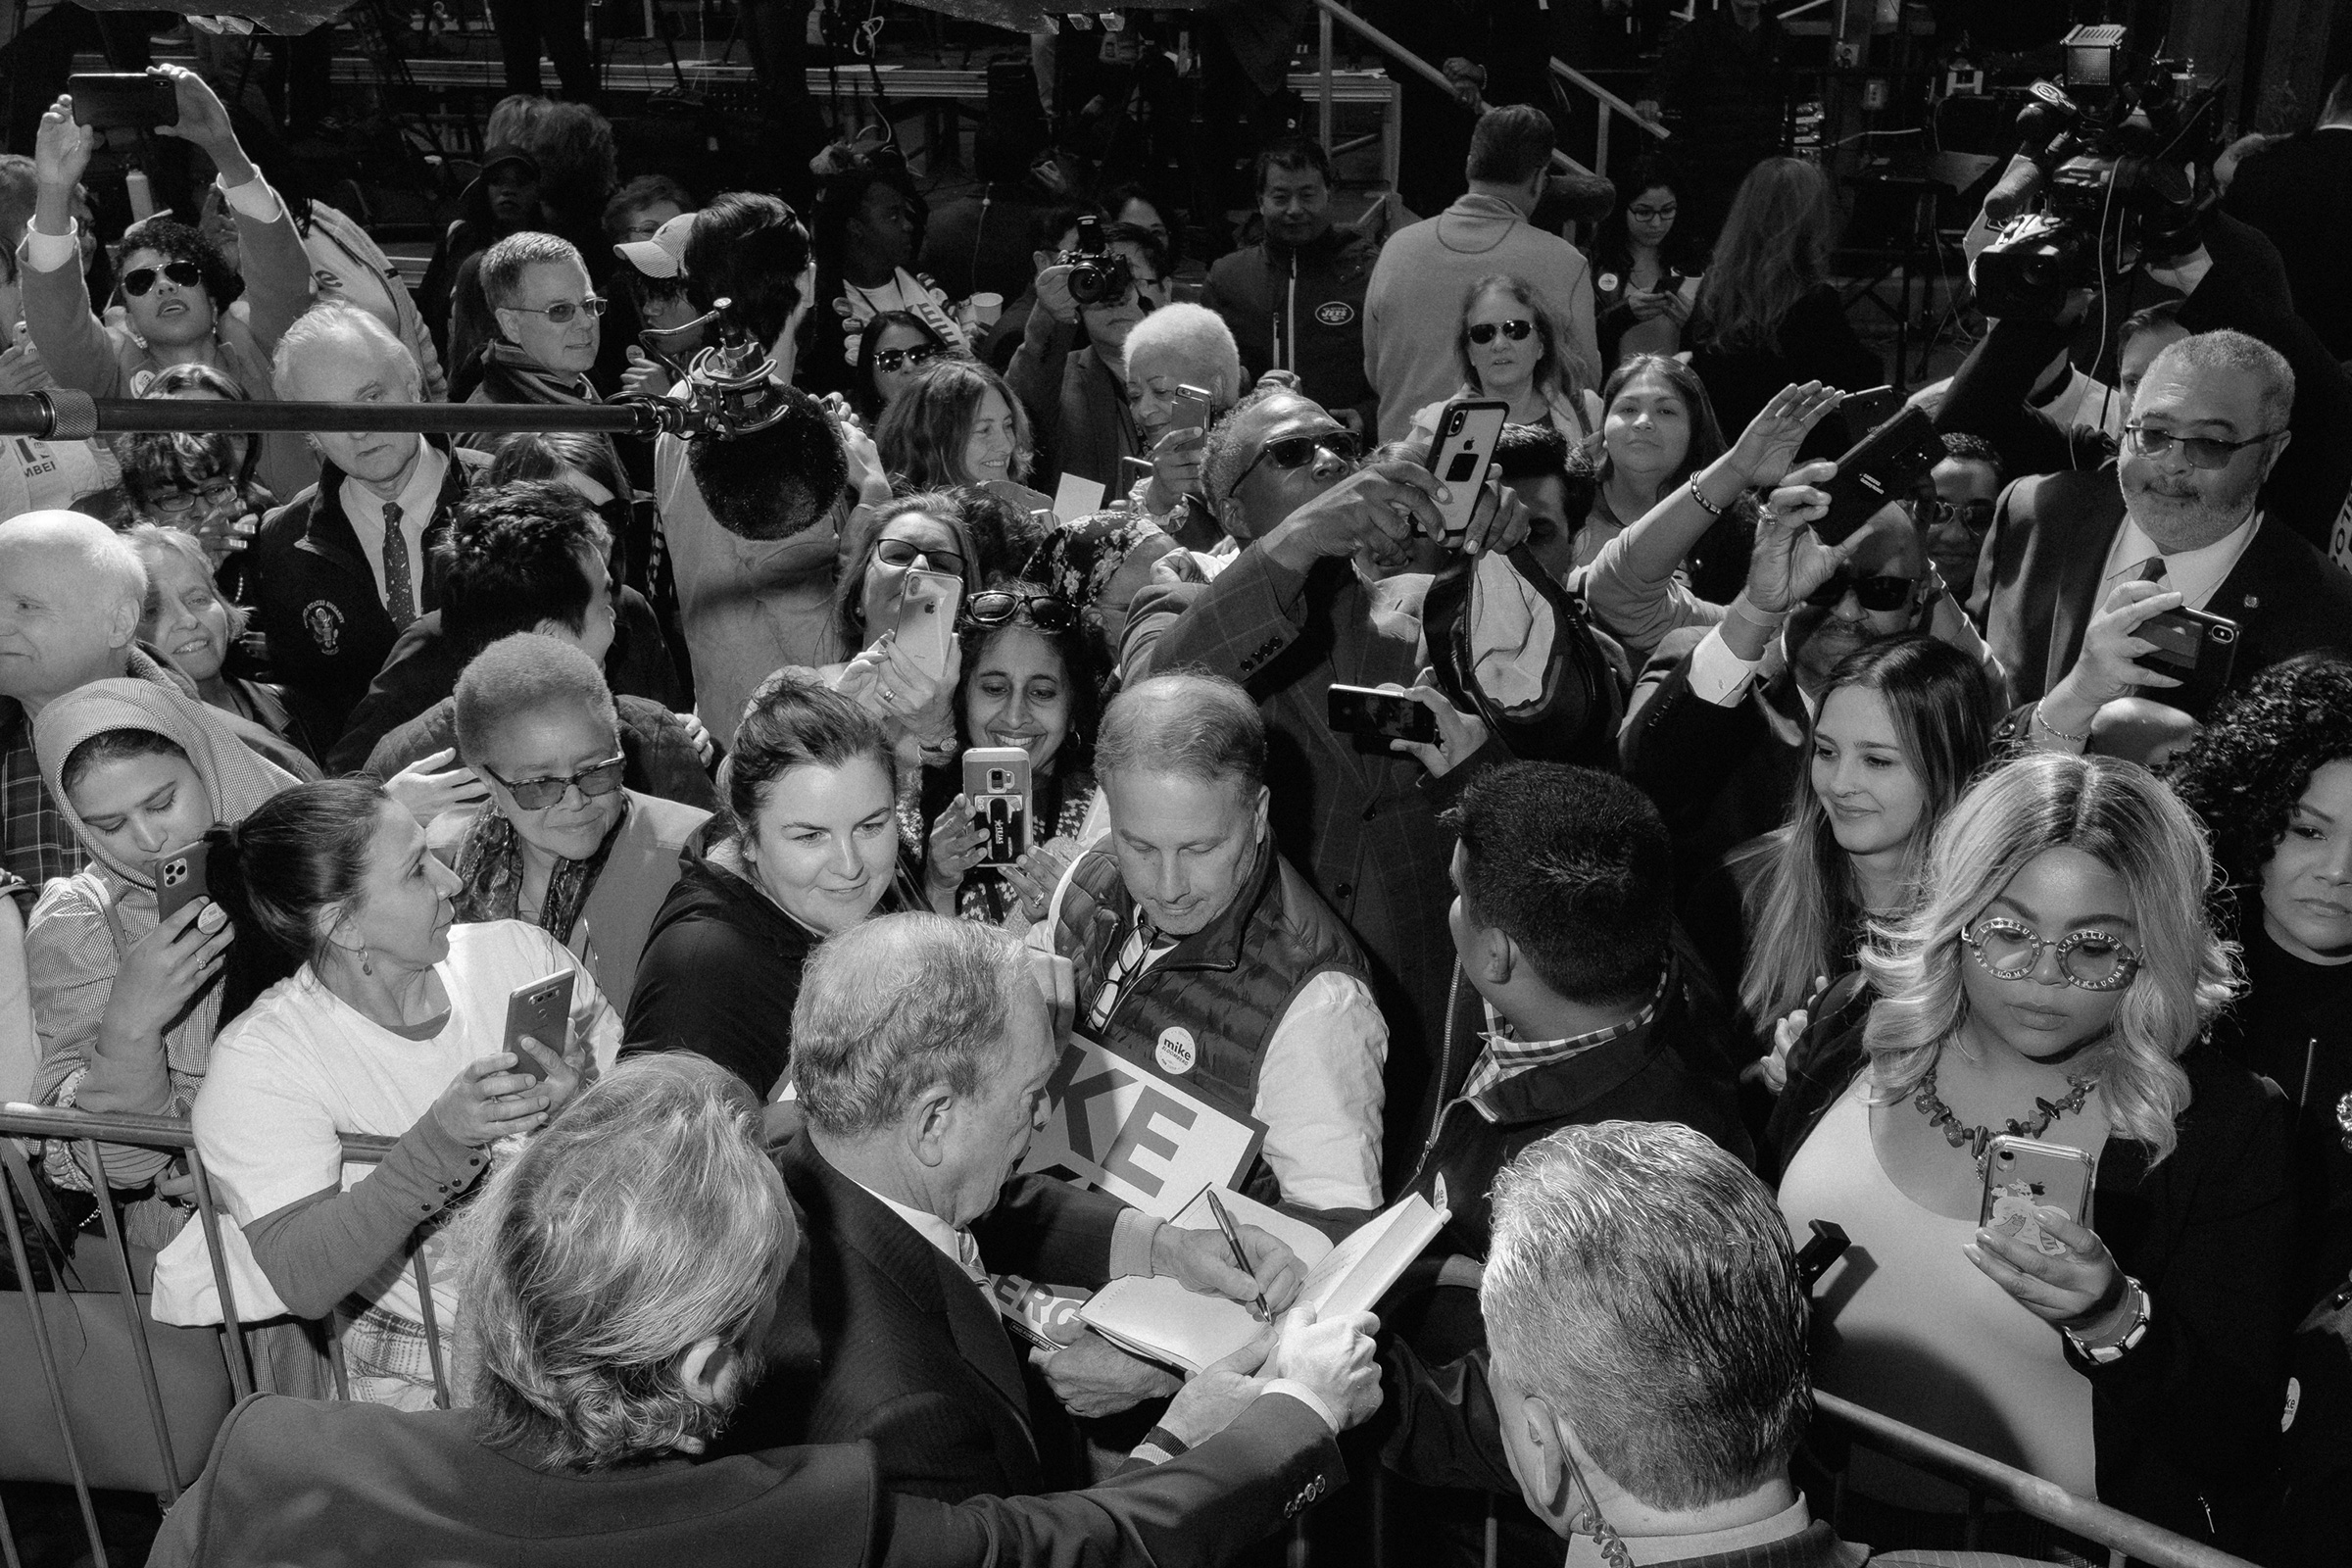 Bloomberg signs autographs and greets supporters at a rally in downtown Houston on Feb. 27. (Christopher Lee for TIME)